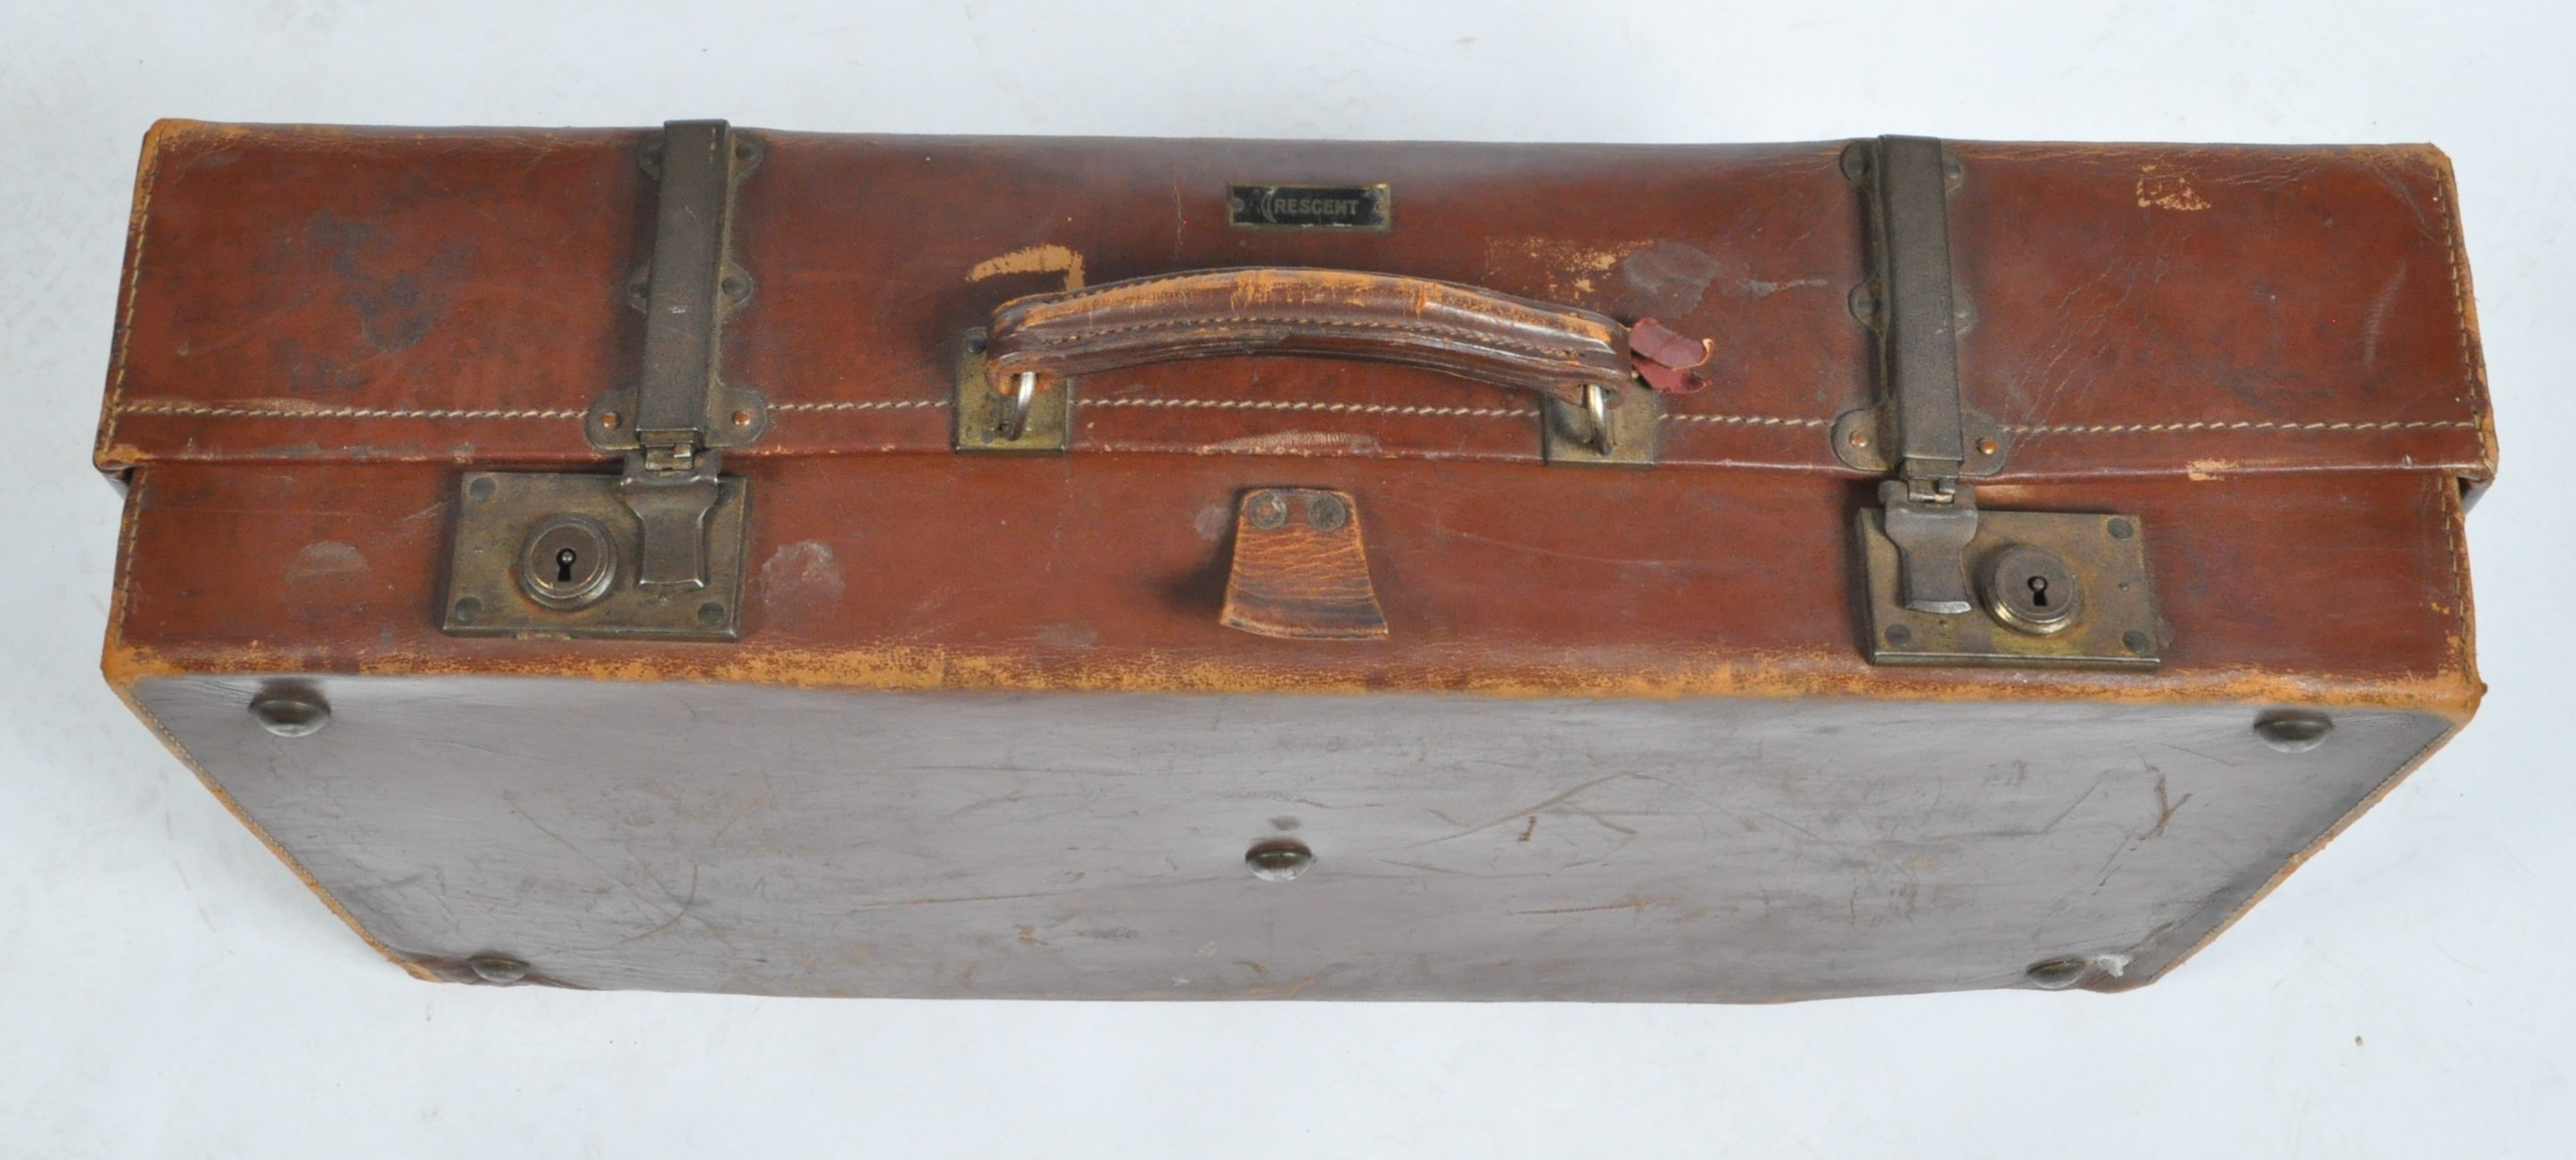 COLLECTION OF VINTAGE LUGGAGE - LEATHER SUITCASES - Image 10 of 14